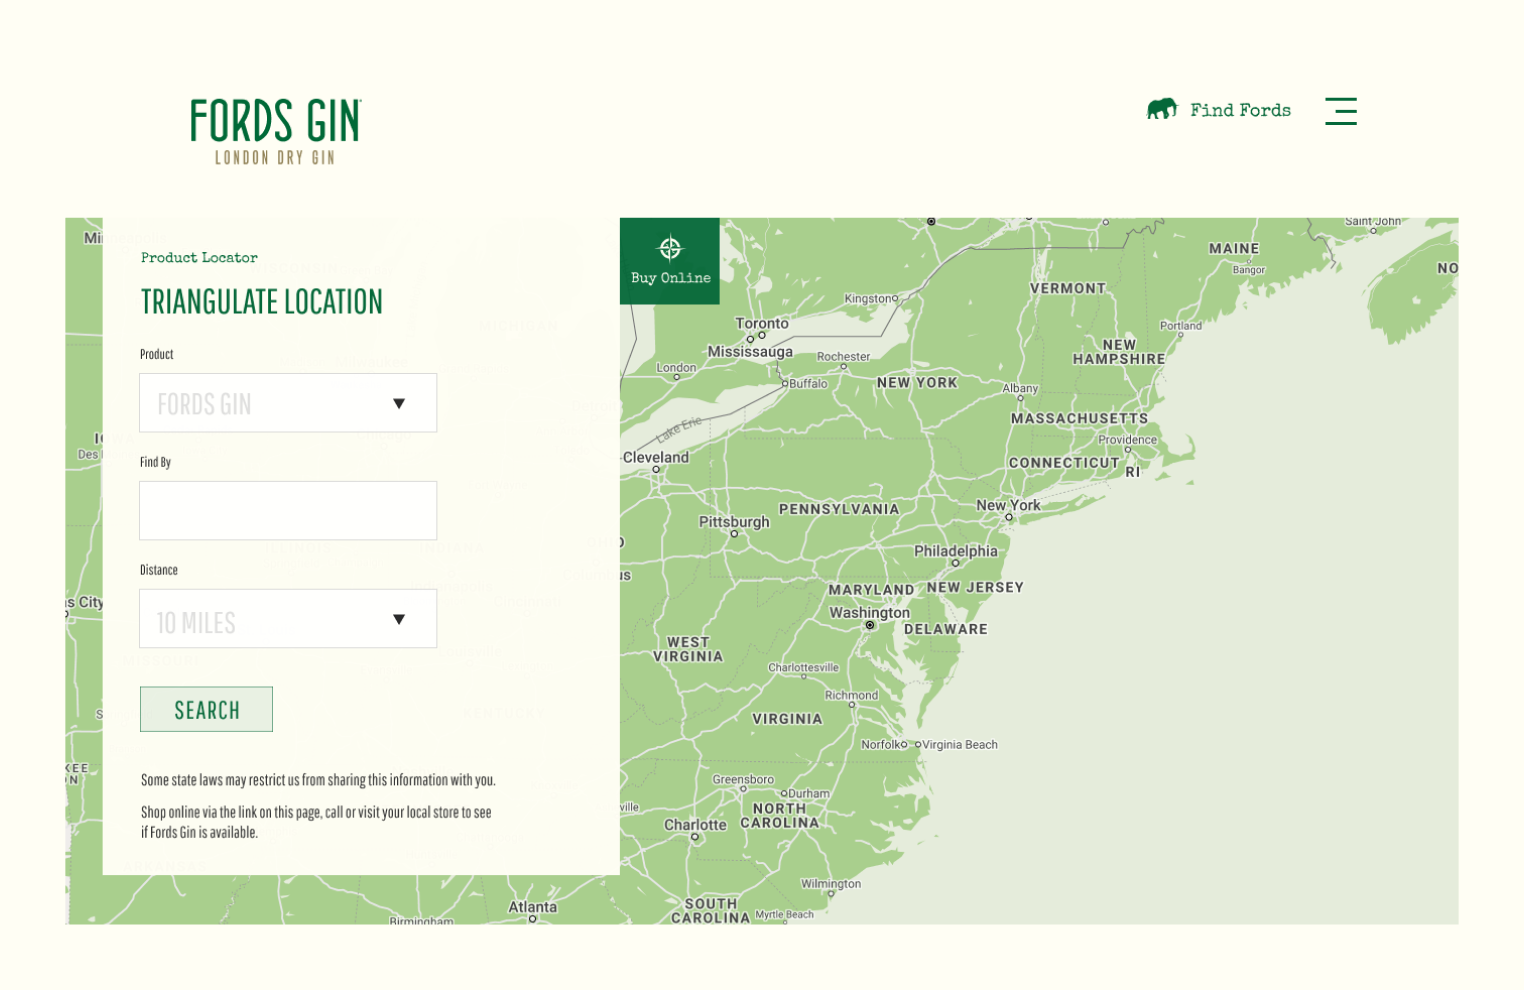 Map and search fields where you can search for Fords Gin